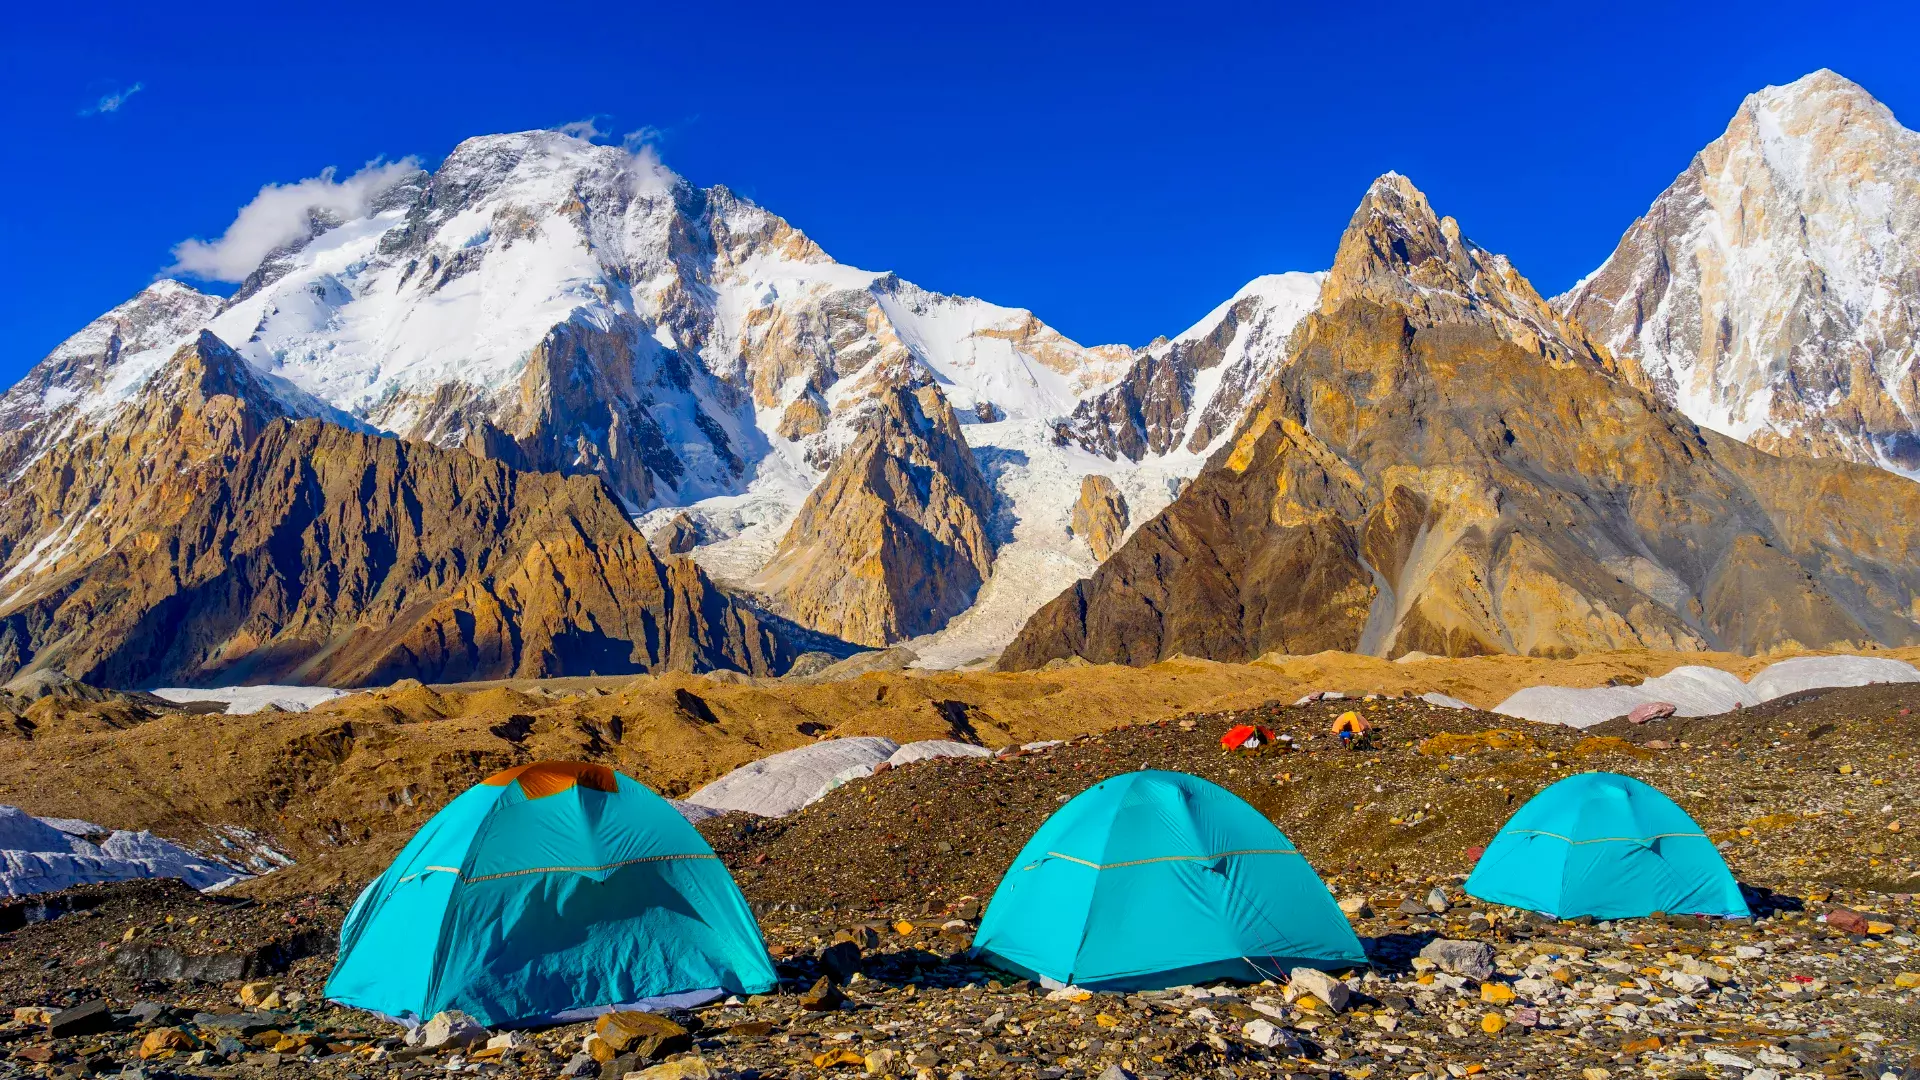 Blue tents at Concordia Camp with Broad Peak Expedition and K2 in the background